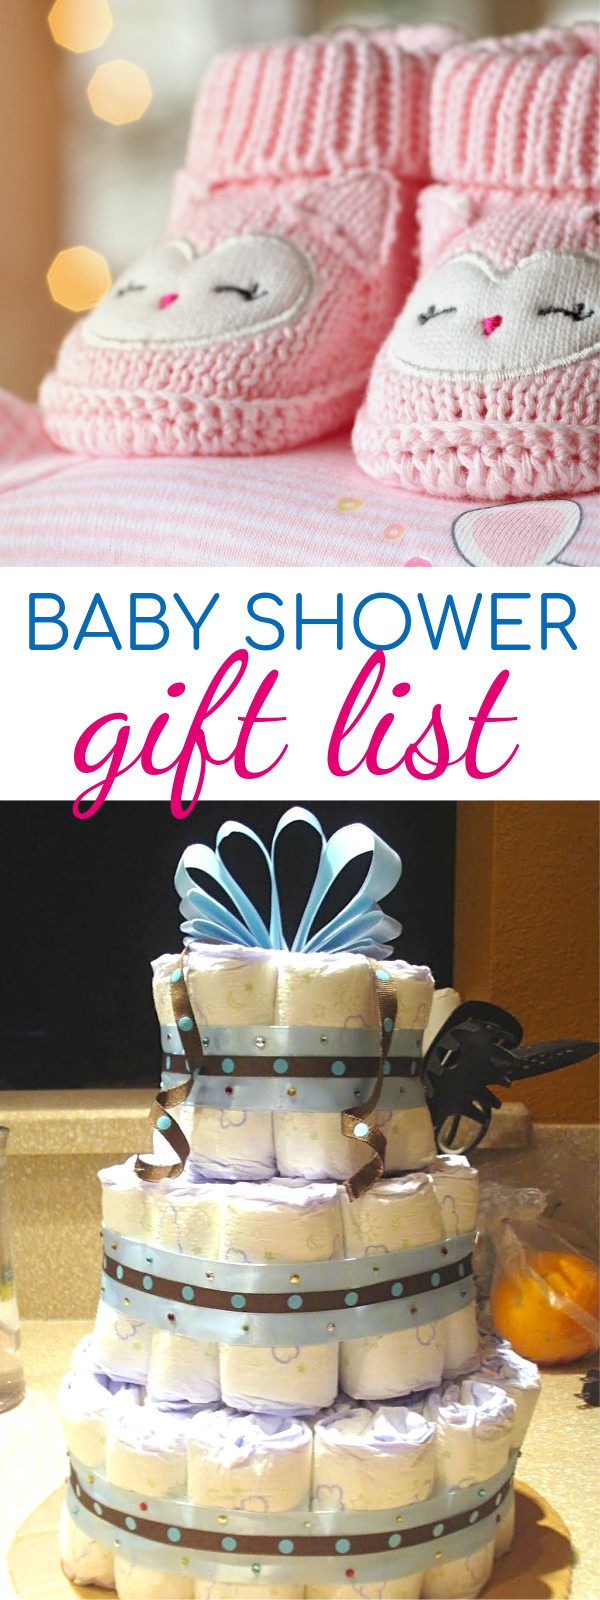 Crafty Baby Shower Gift Ideas
 Baby Shower Gift List 5 Creative and Unique Baby Shower